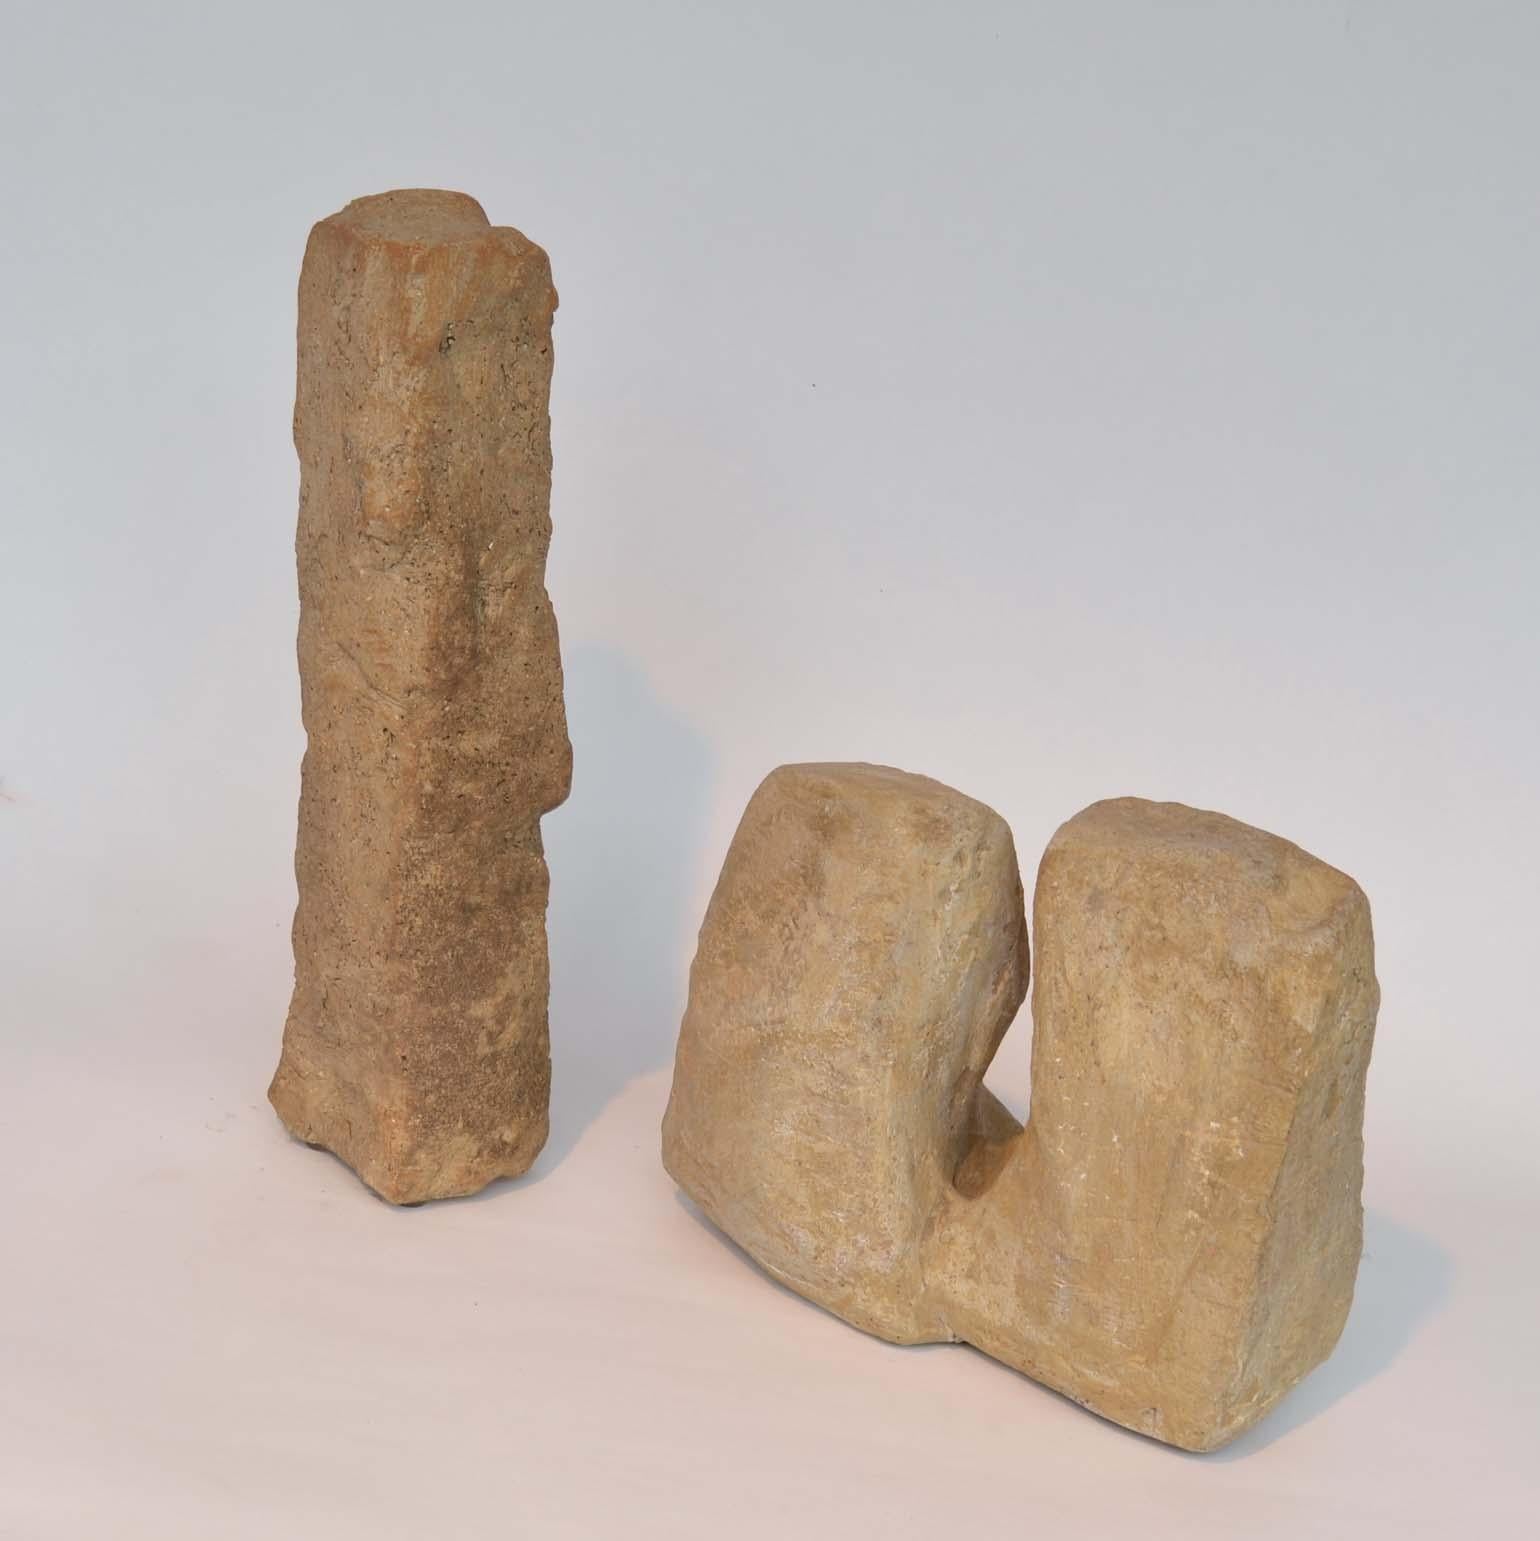 This hand formed ceramic sculpture resemble a freestanding rock in sand stone colour. His sculptures are hand-sculpted ceramic and coloured.
Blow's work echoes a voyage of discovery in not just the visible natural world of trees, rocks but the city